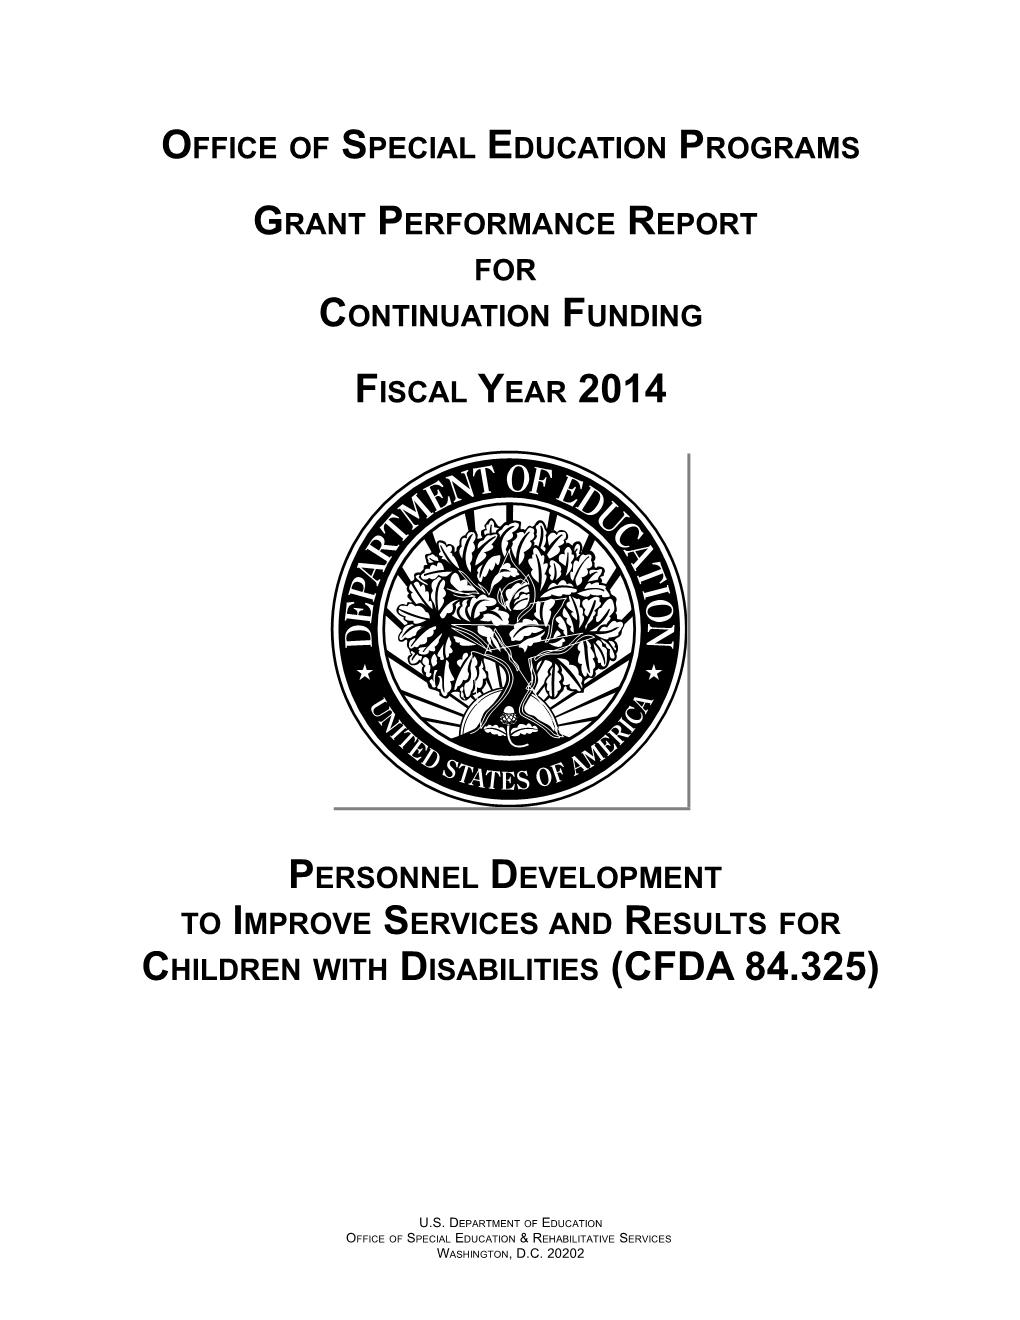 Grant Performance Report for Continuation Funding; Fiscal Year 2014: State Personnel Development